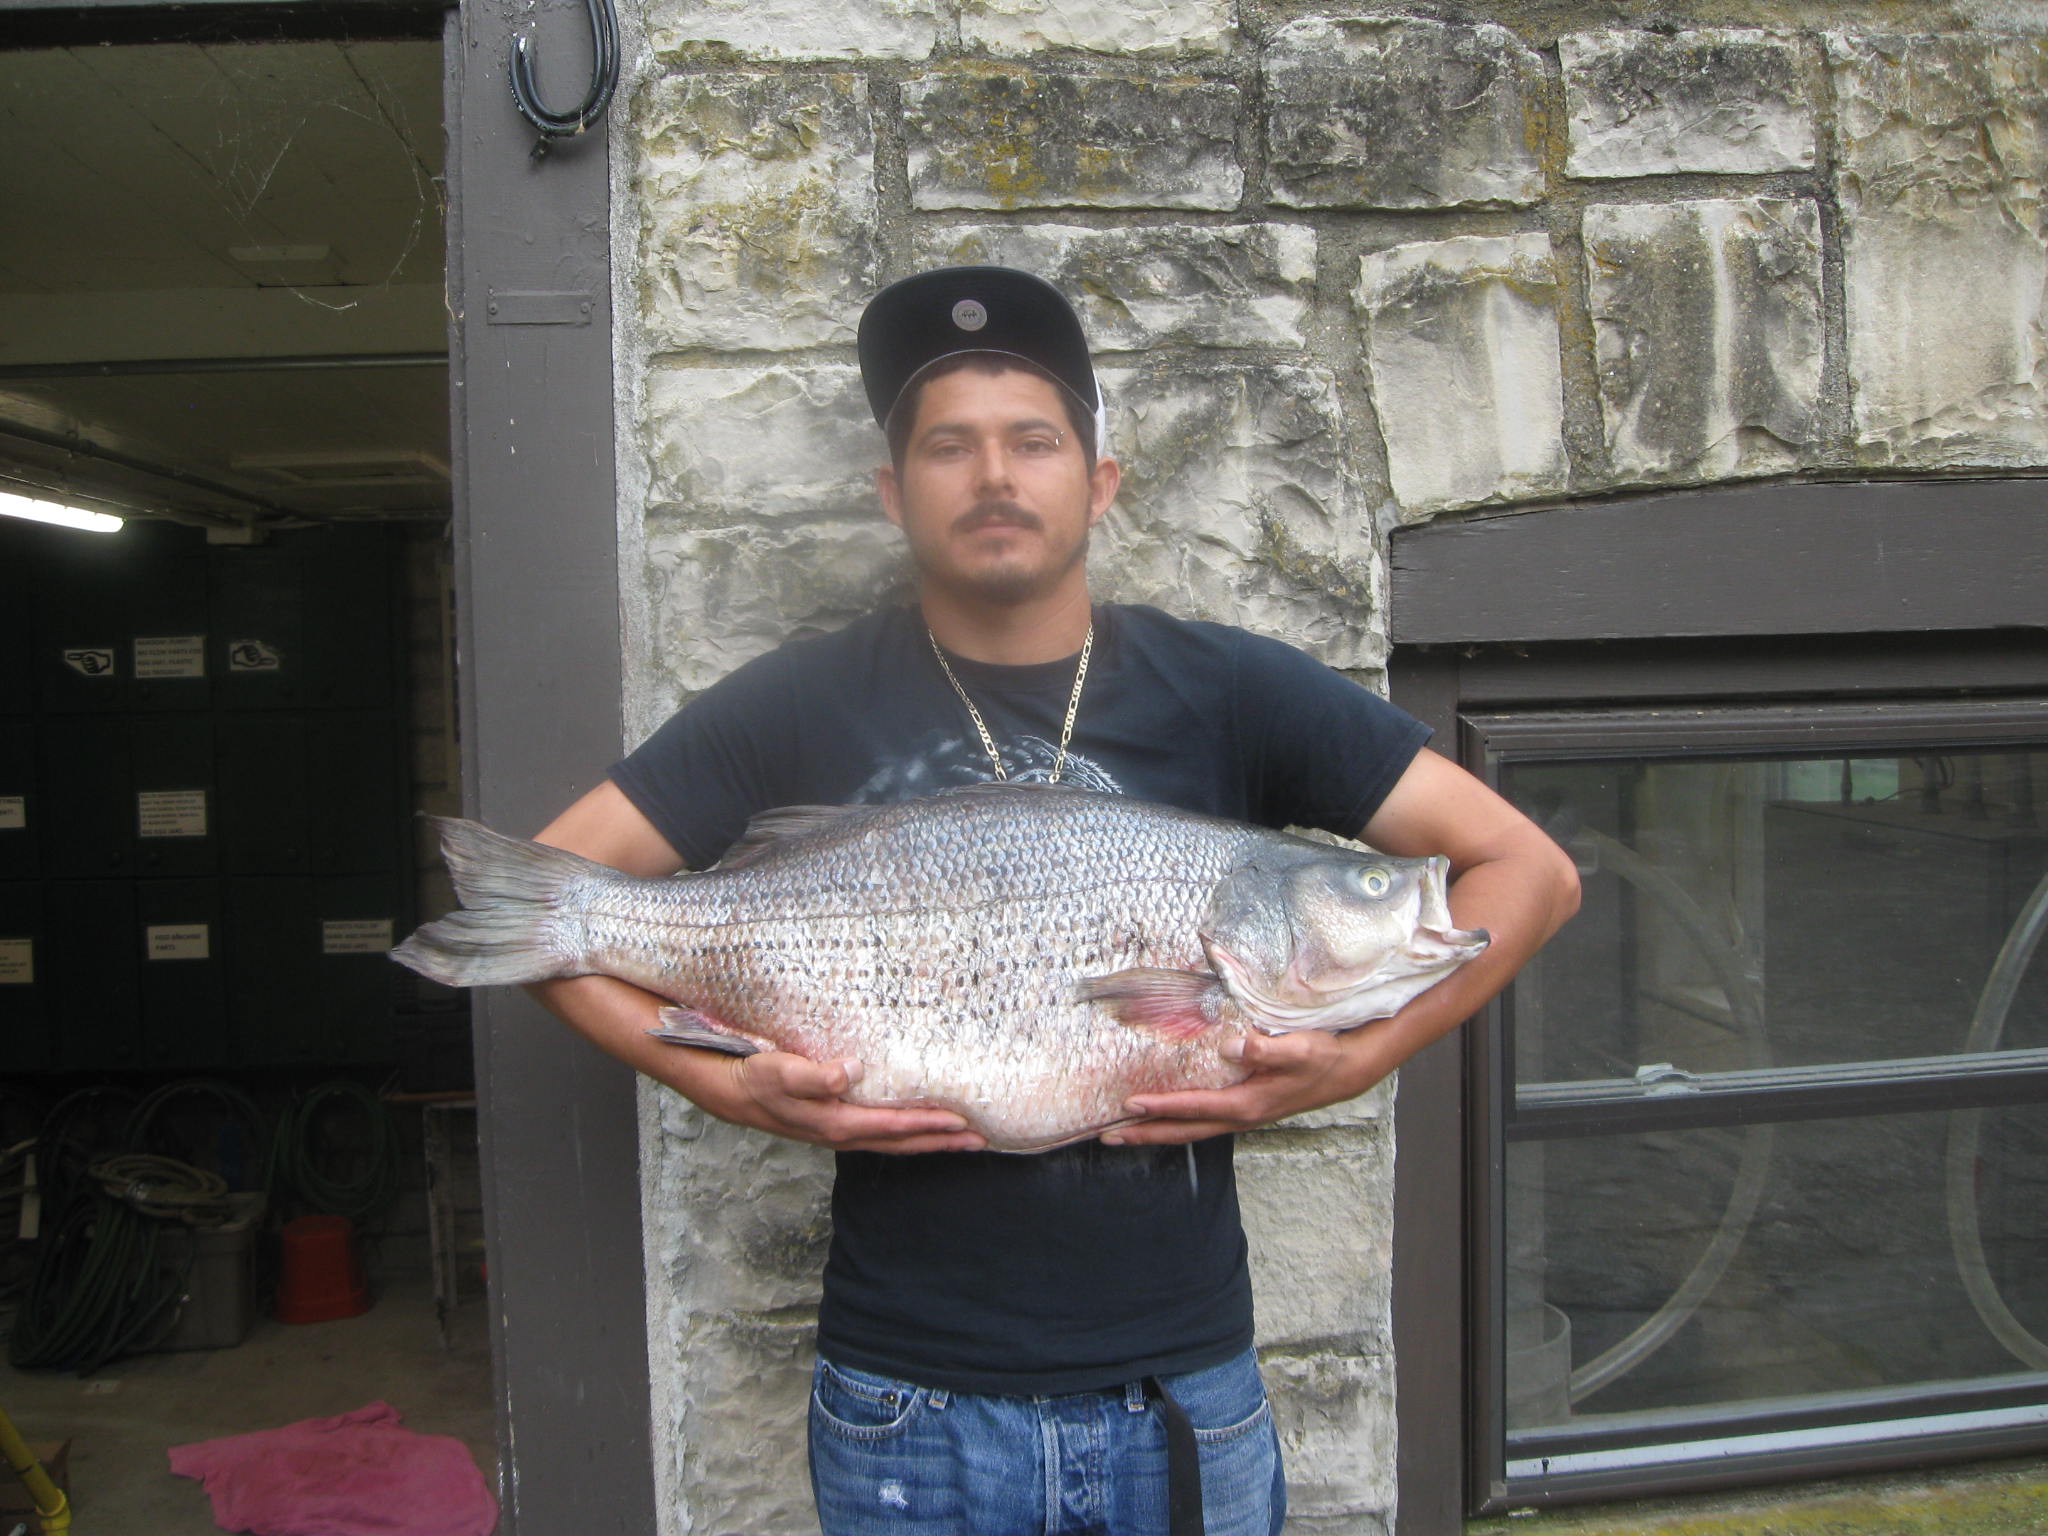 Cesar Rodriguez with his prize striped hybrid bass.